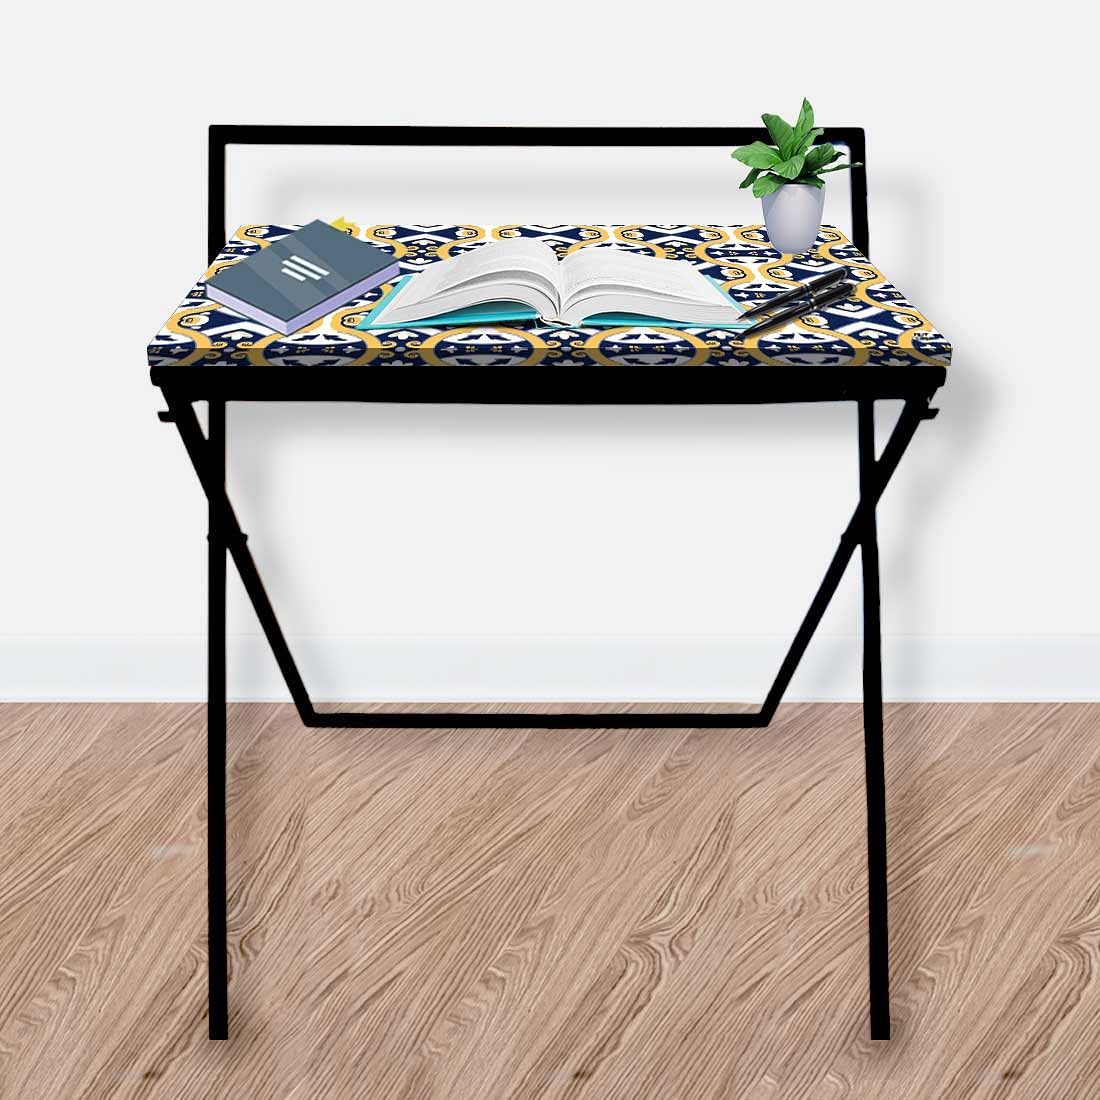 Foldable Study Table for Adults Home Computer Work - Spanish Nutcase